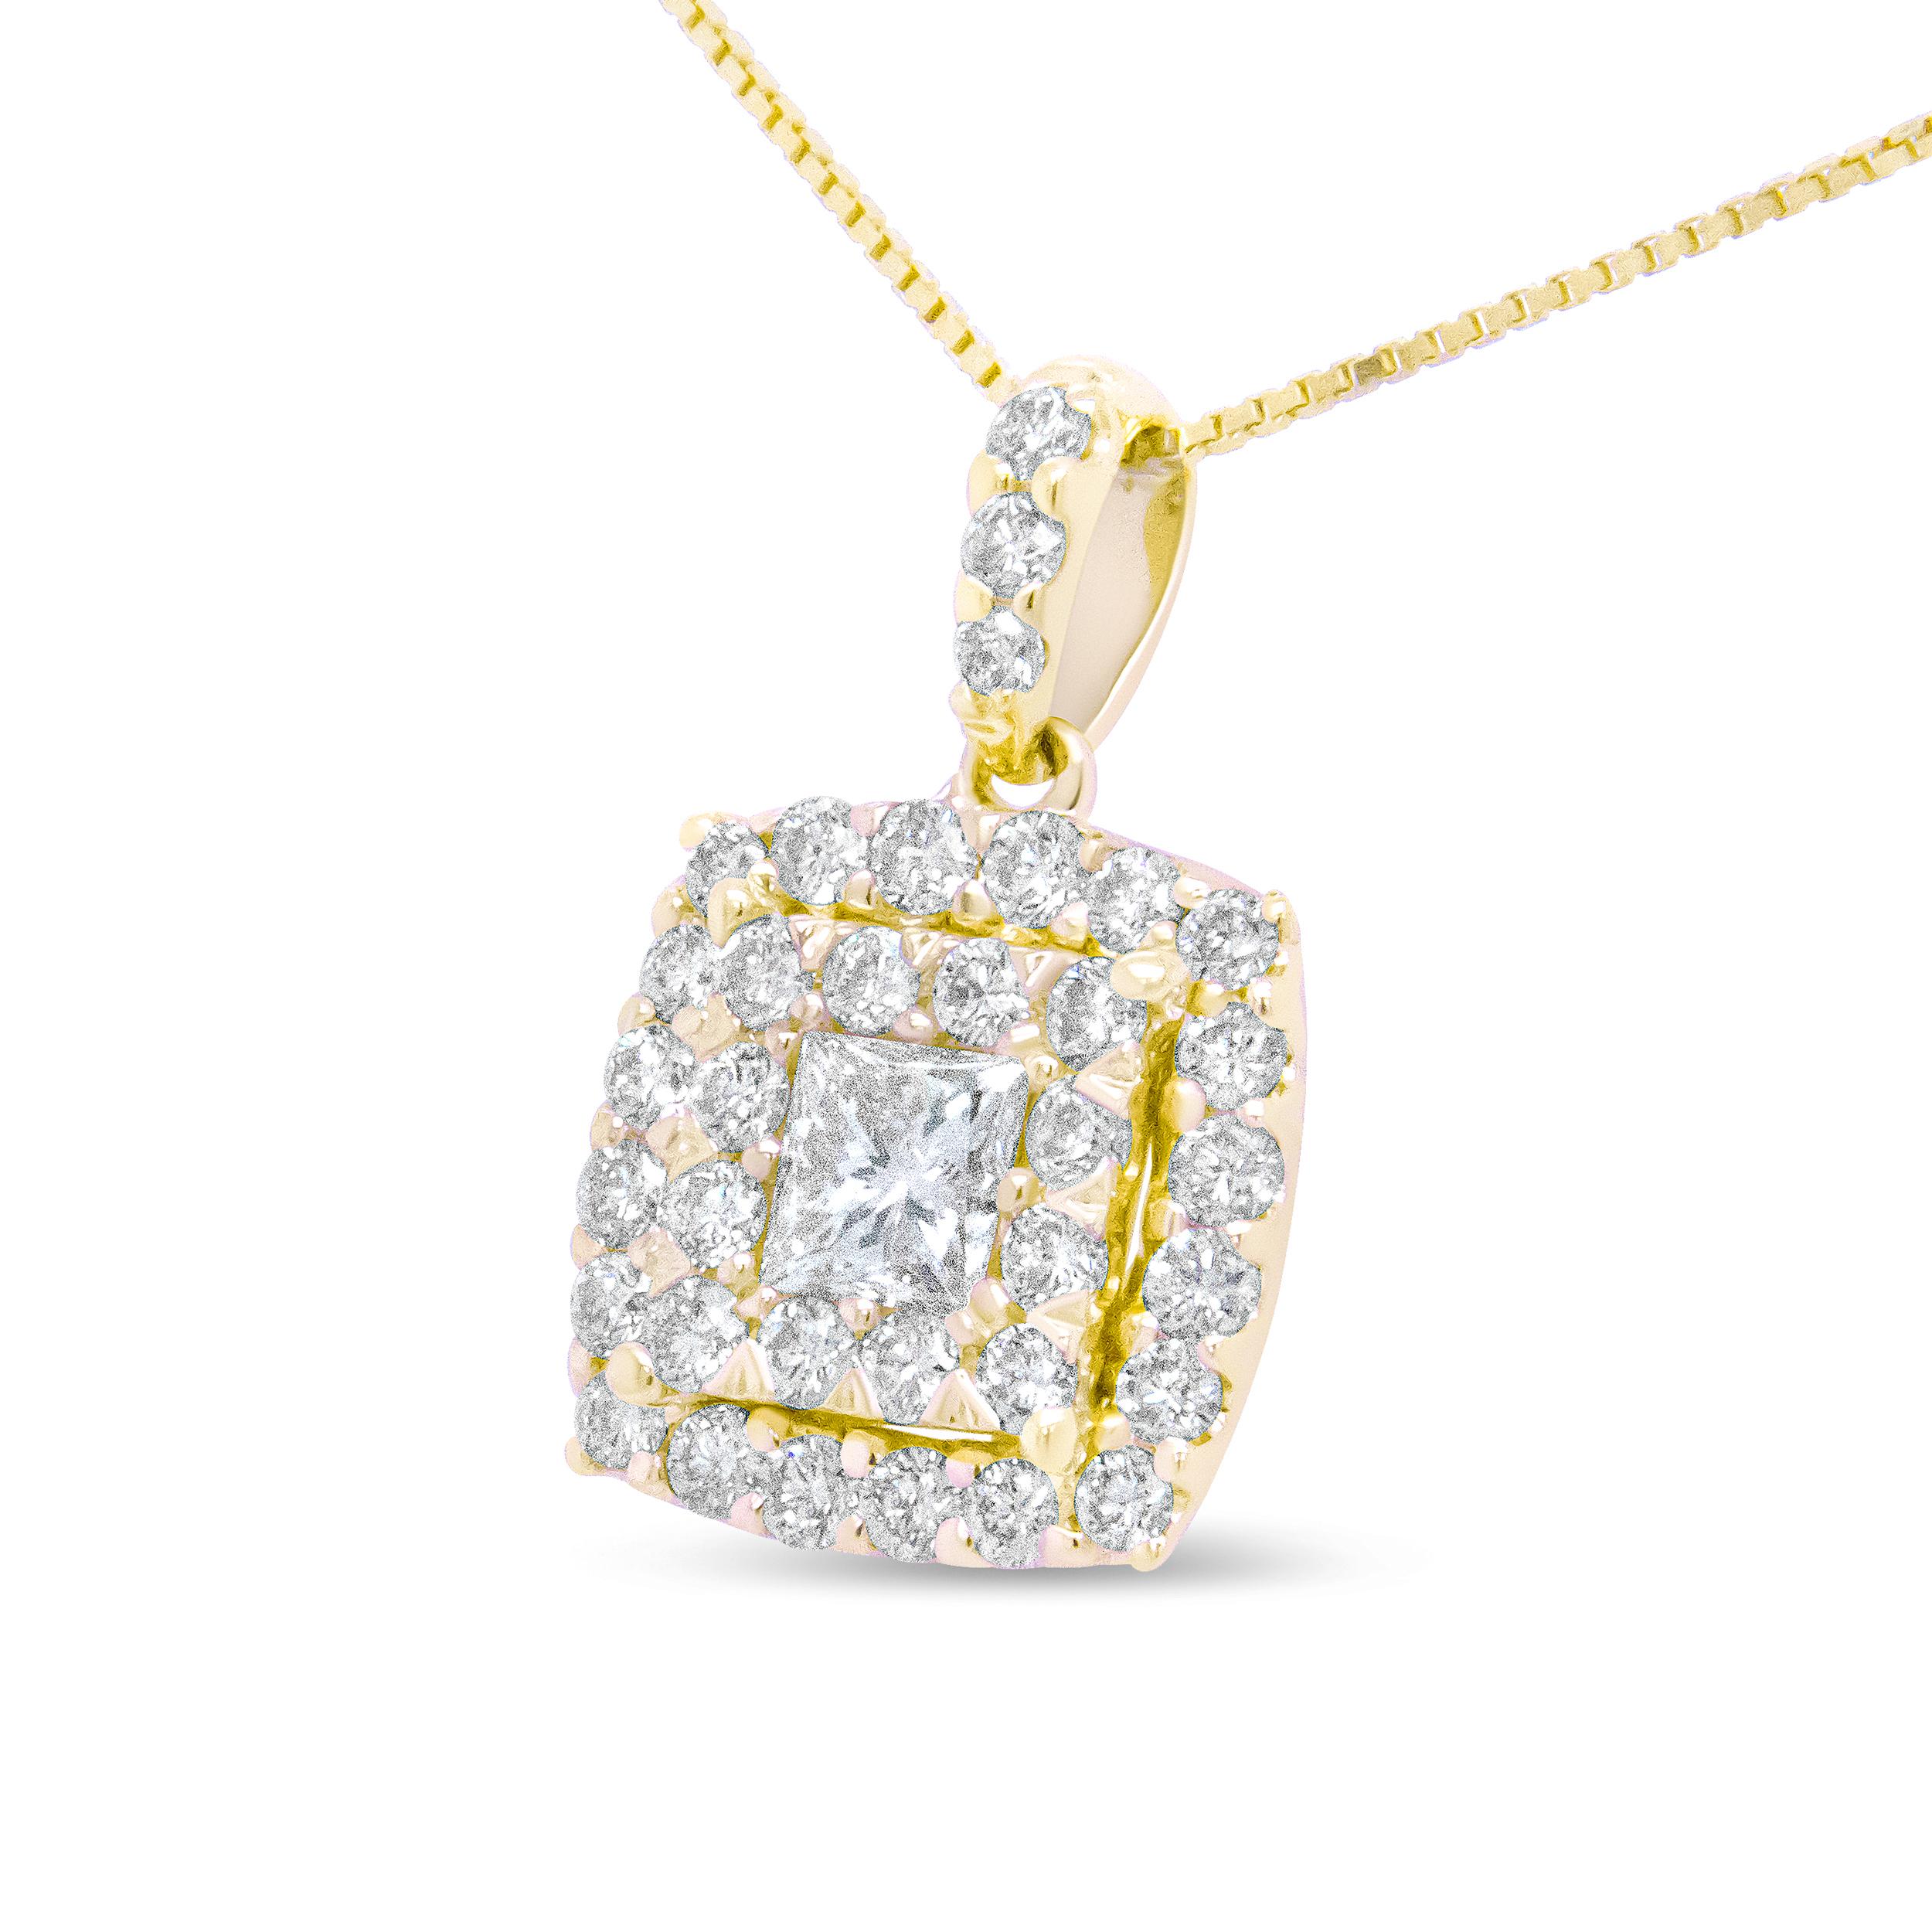 This diamond pendant necklace is a shining addition to any wardrobe selection. Crafted in 14k yellow gold, this splendorous piece showcases a brilliant, princess-cut diamond cradles in a prong setting and framed by a double halo of marvelous round